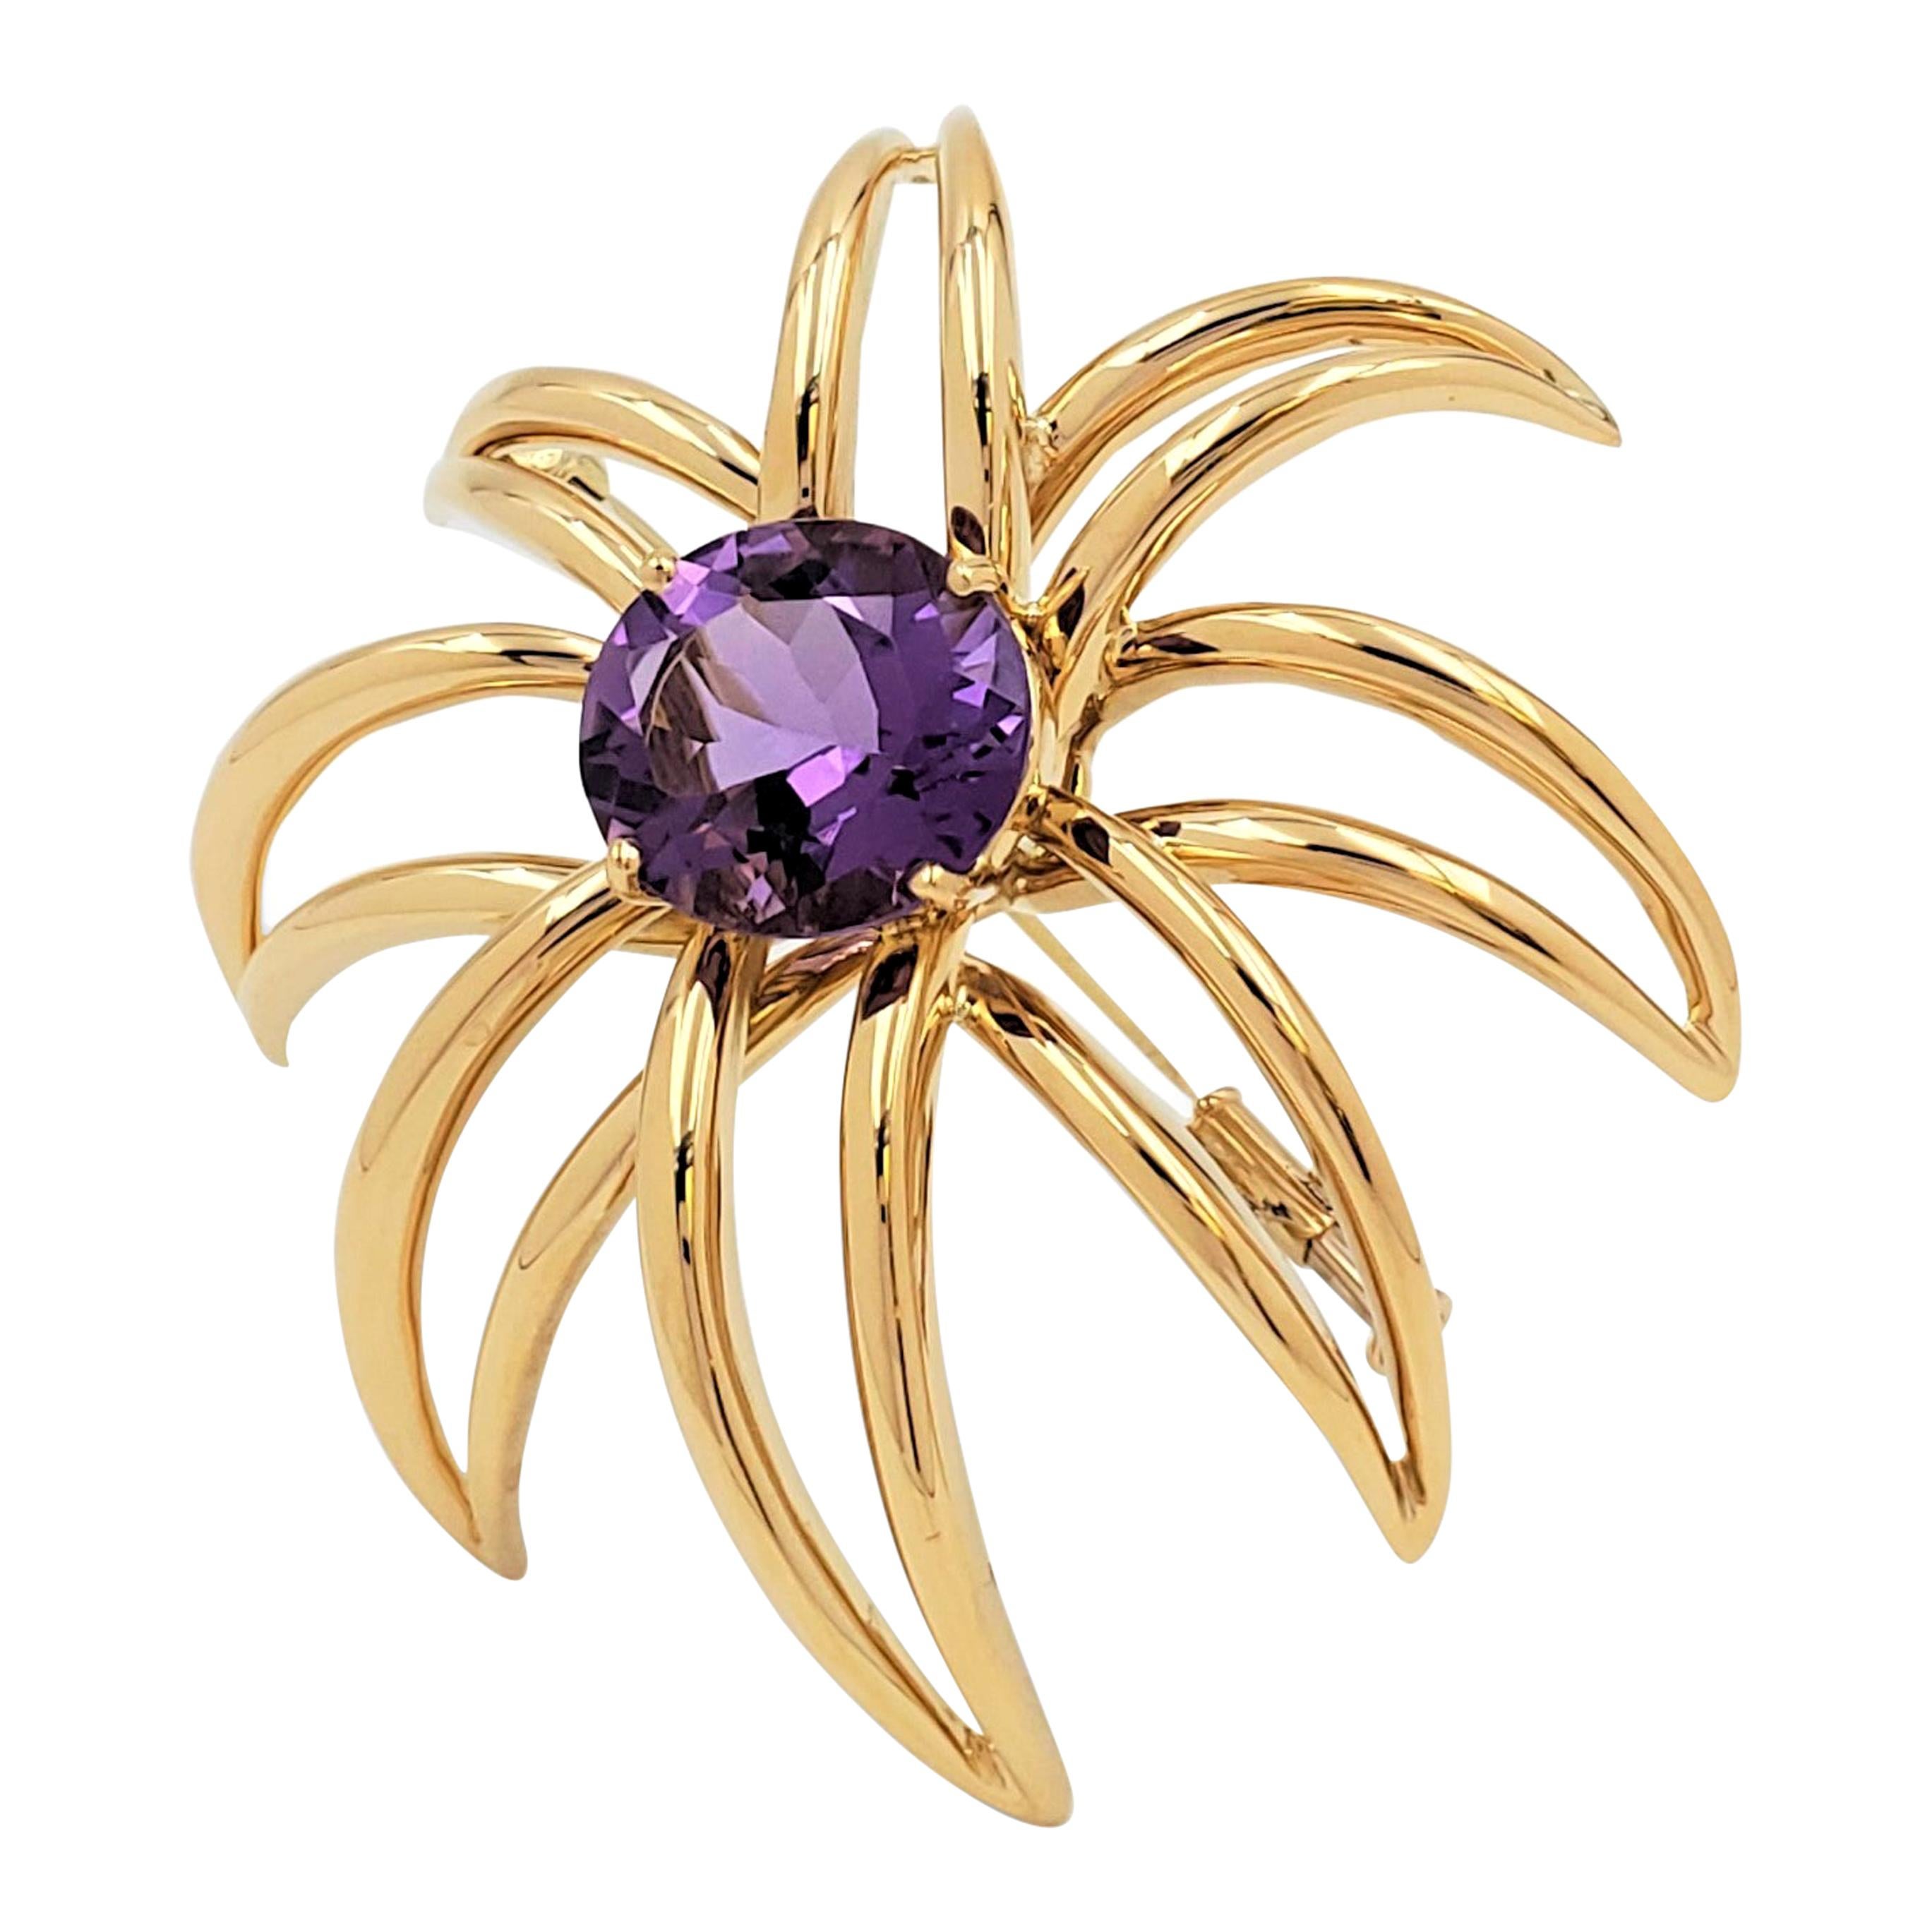 Tiffany & Co. 'Fireworks' Yellow Gold and Amethyst Brooch